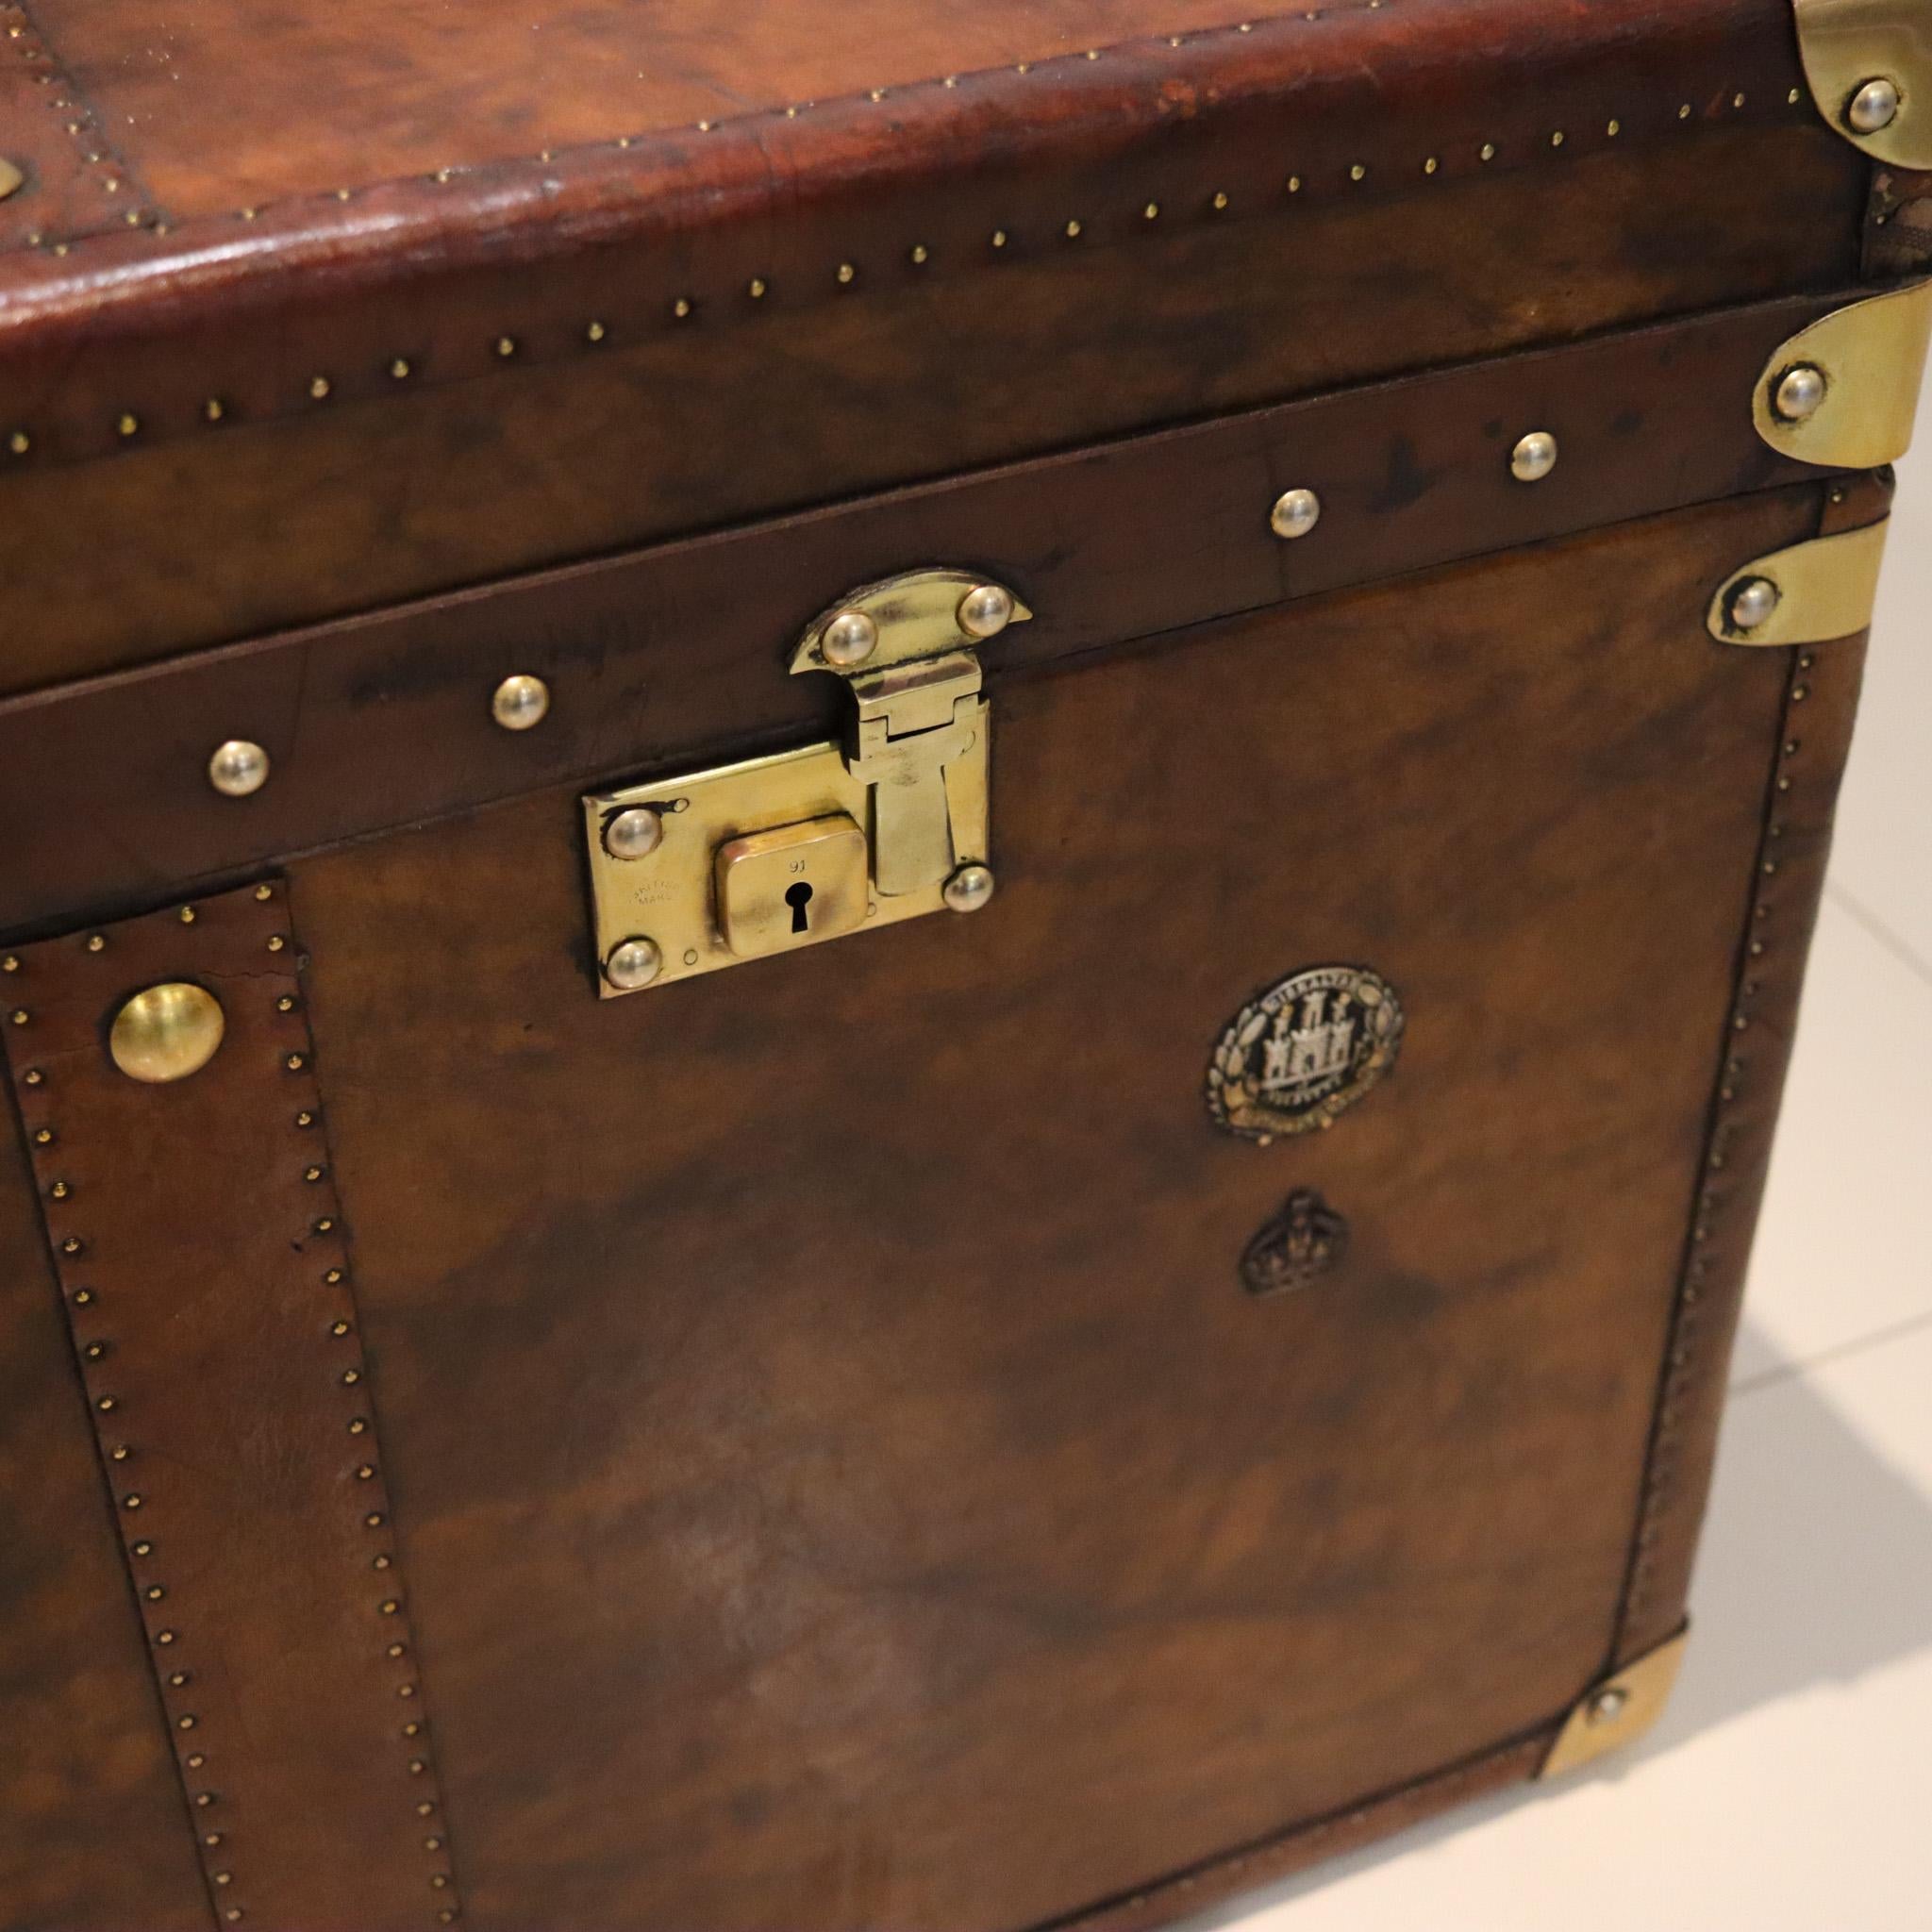 A military officer chest.

Exceptional square British military officer's travel trunk chest, from the late Victorian era, circa 1900. It was superbly rebuilt and refurbished in beautifully patinated antique leather with accents in solid brass and